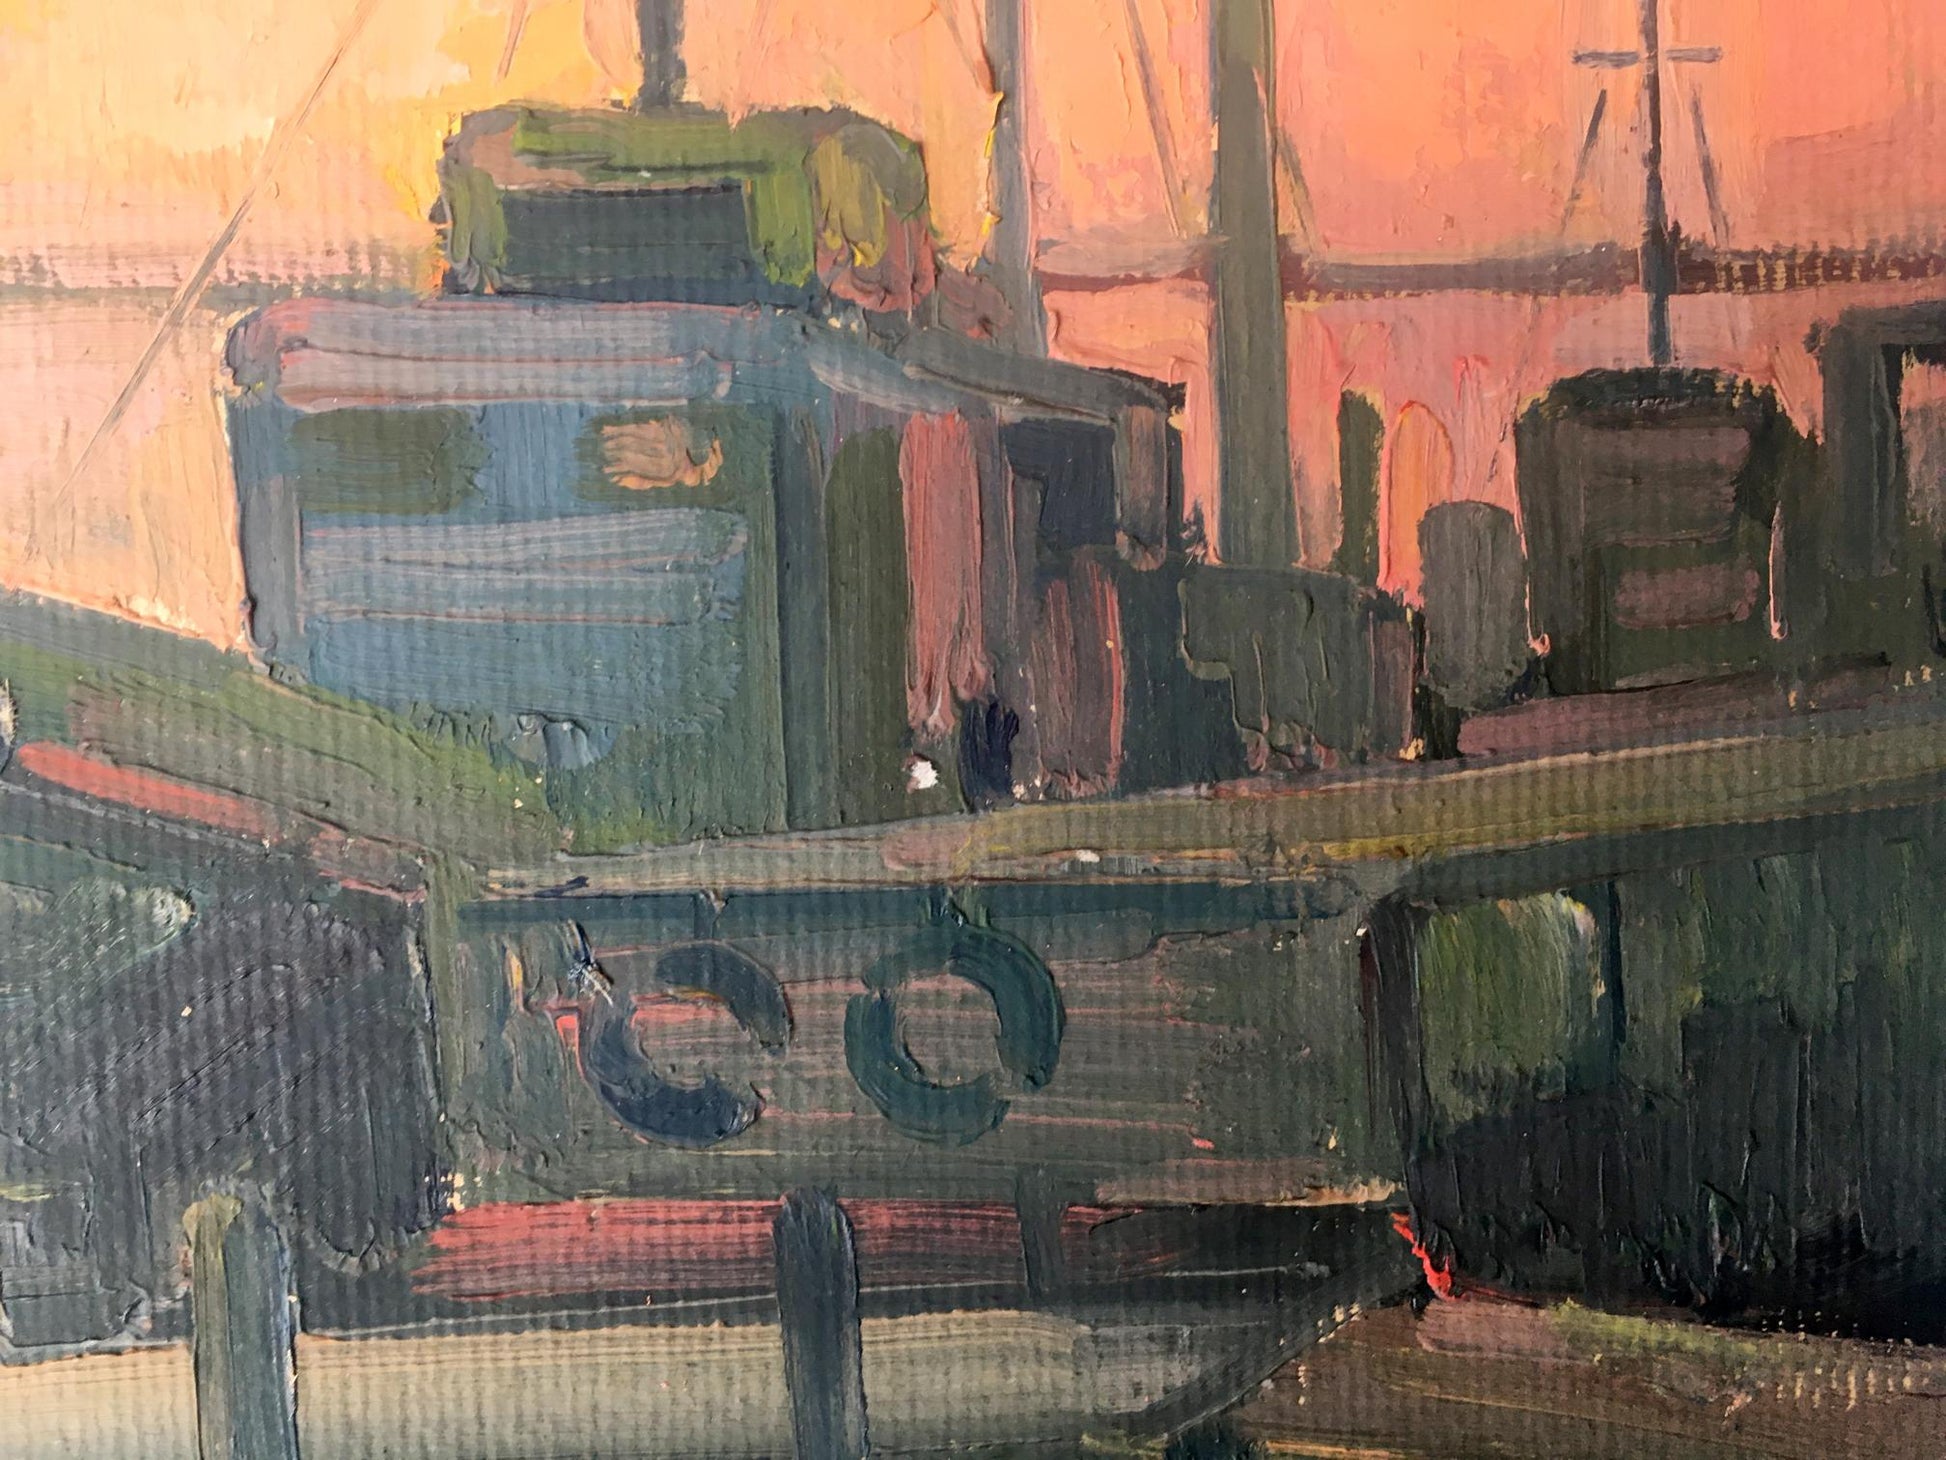 Peter Dobrev's oil painting invites viewers to experience the maritime ambiance of a busy port